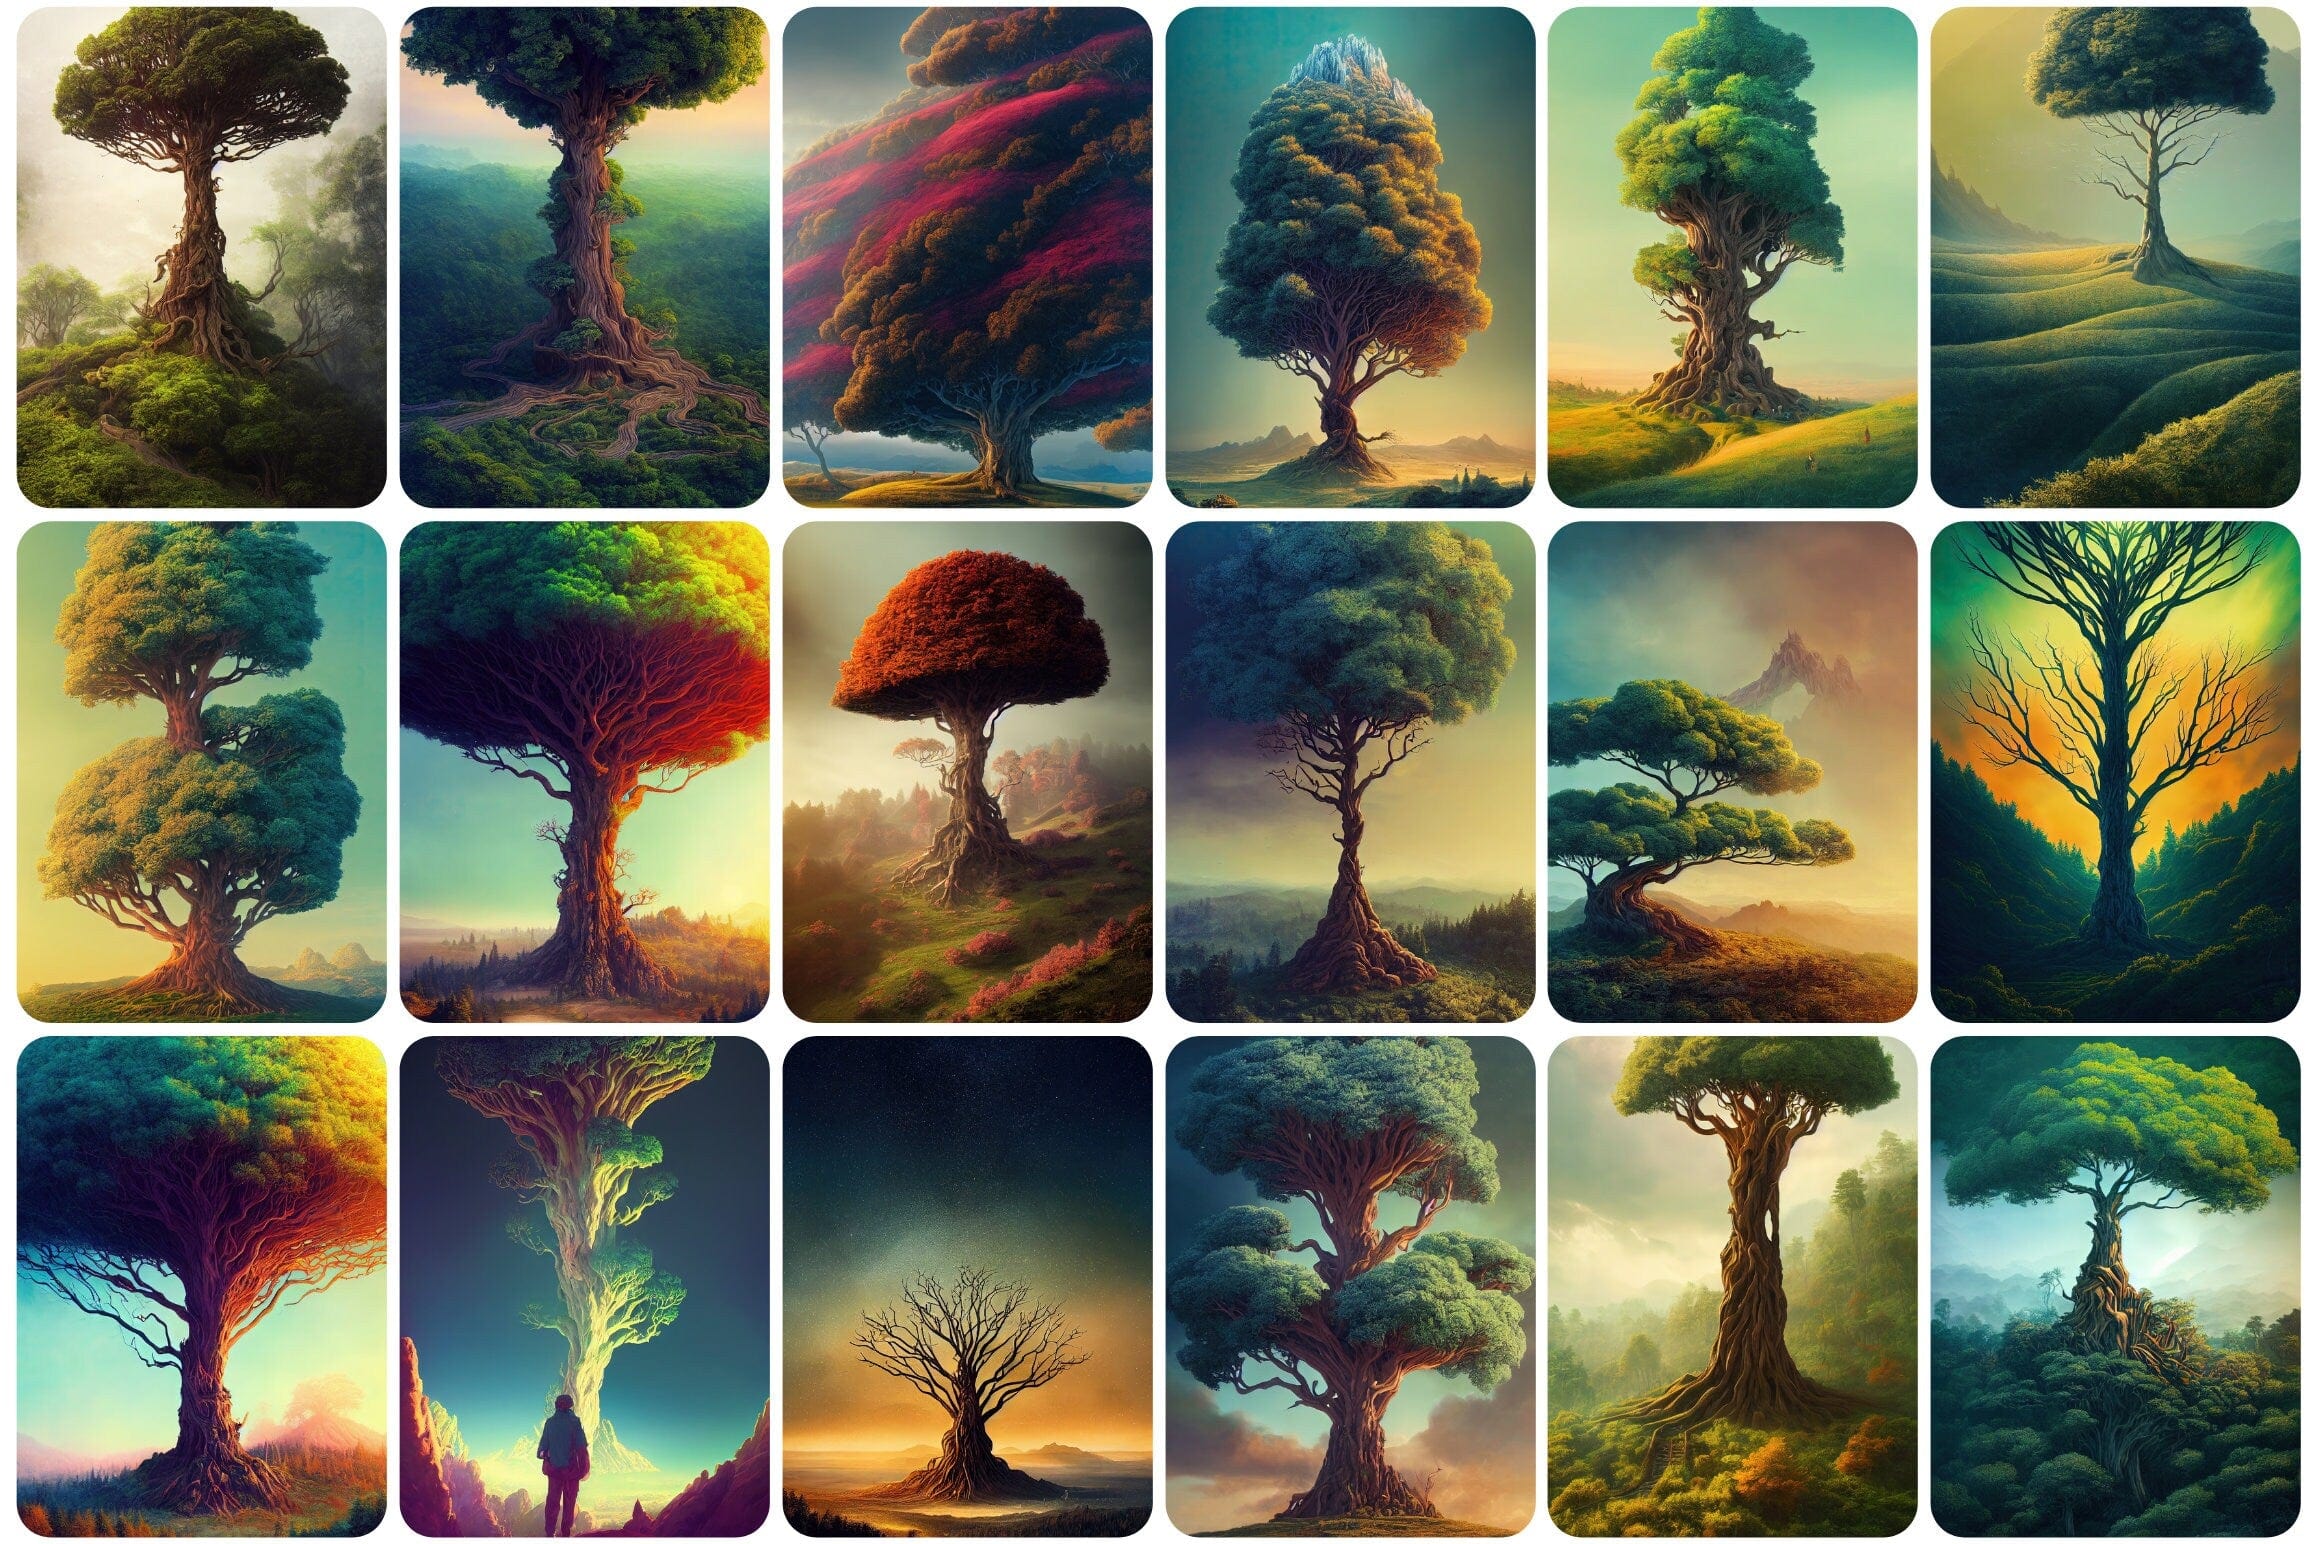 190 Surreal Tree Printable Wall Art Images - Brighten up any Room with Vibrant Animal Wall Art - New York and Paris Prints, Digital Download Digital Download Sumobundle